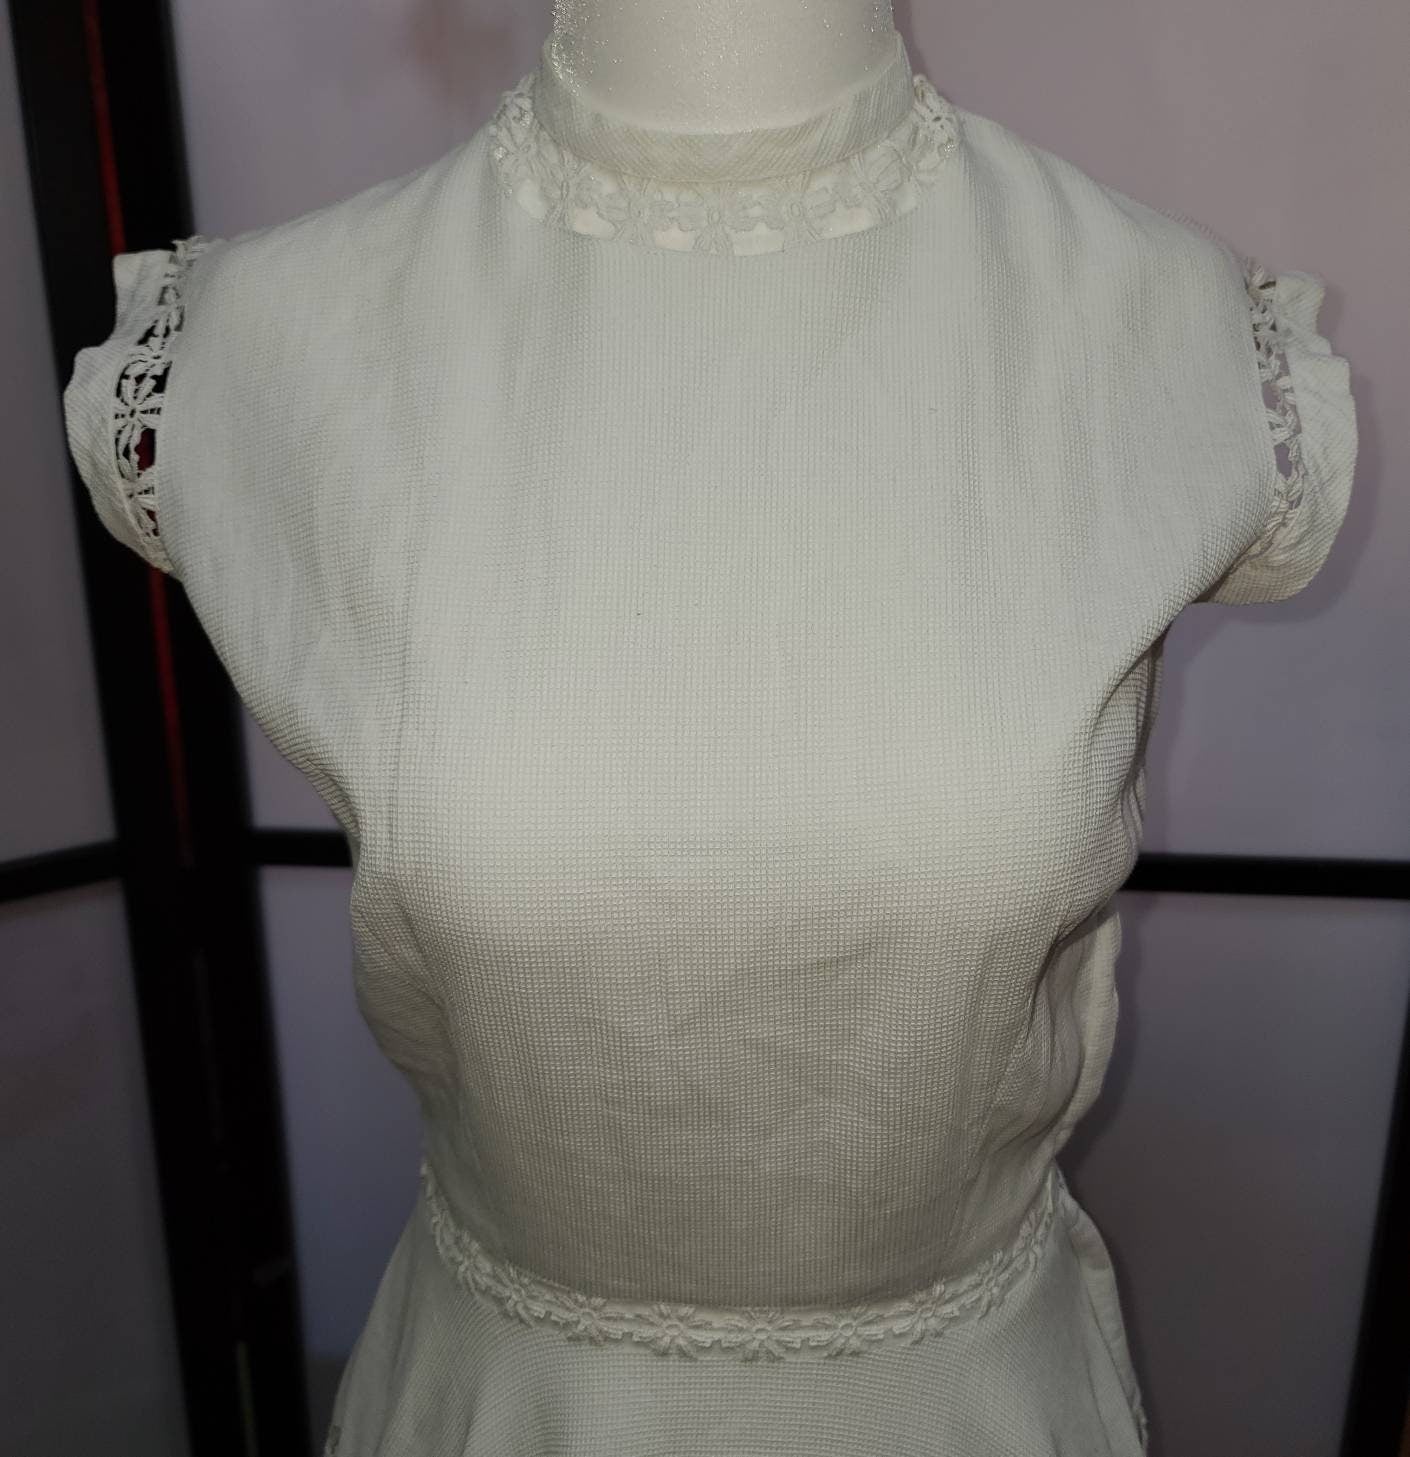 Vintage 1950s Dress White Cotton Pique Cutout Lace Inserts Full Skirt Minx Modes Mid Century Rockabilly Pinup Casual Wedding Bridal S